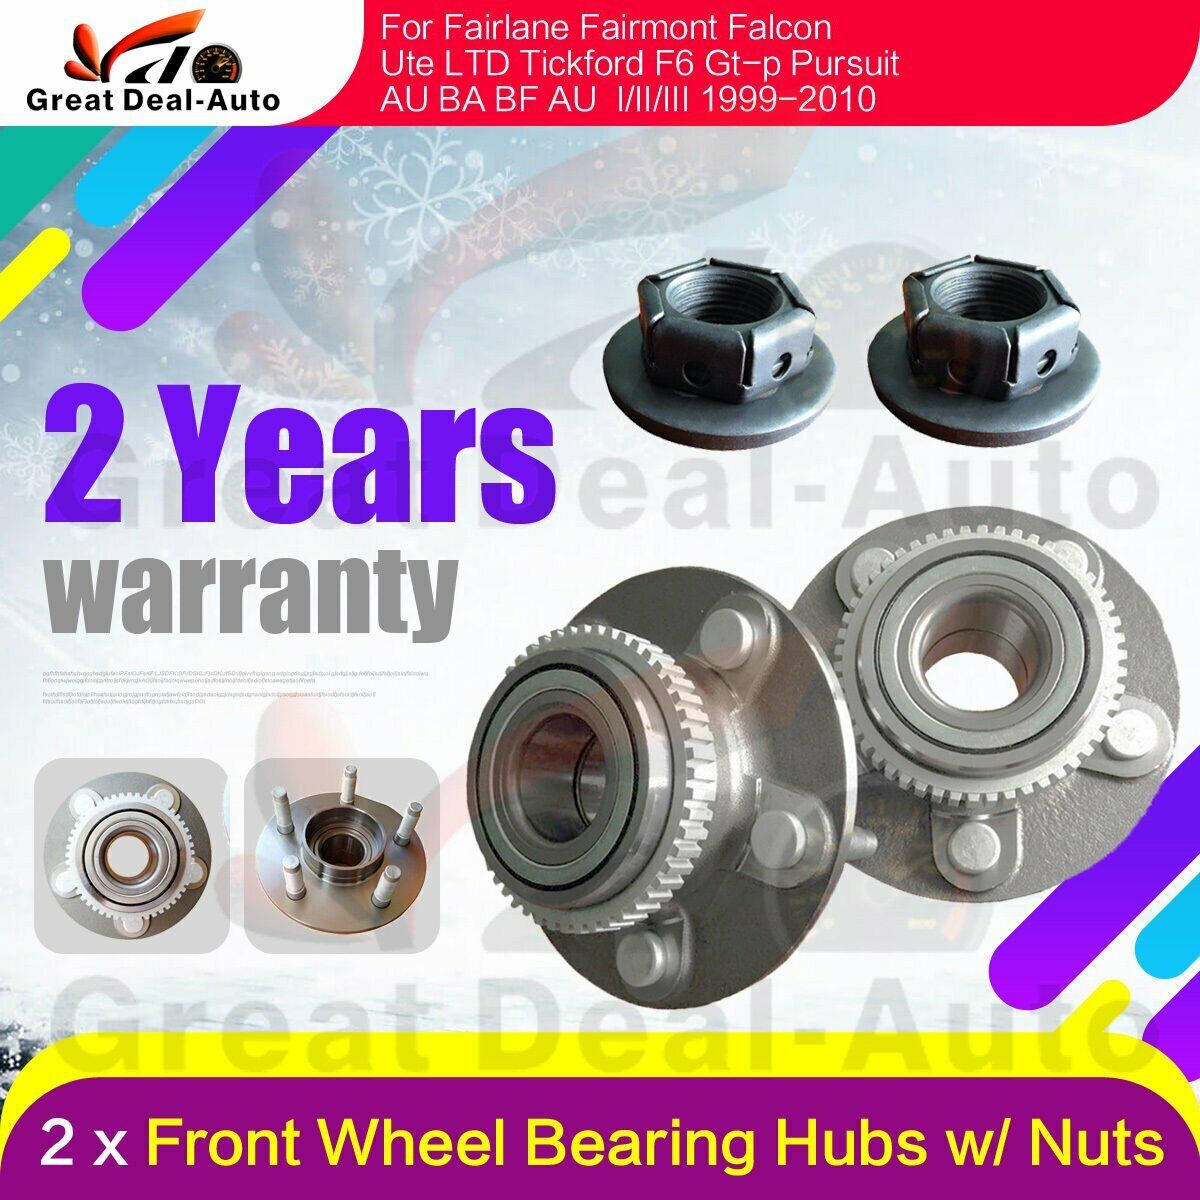 2 for Ford Falcon Brand New Front Wheel Bearing Hubs AU BA BF & Territory +Nuts